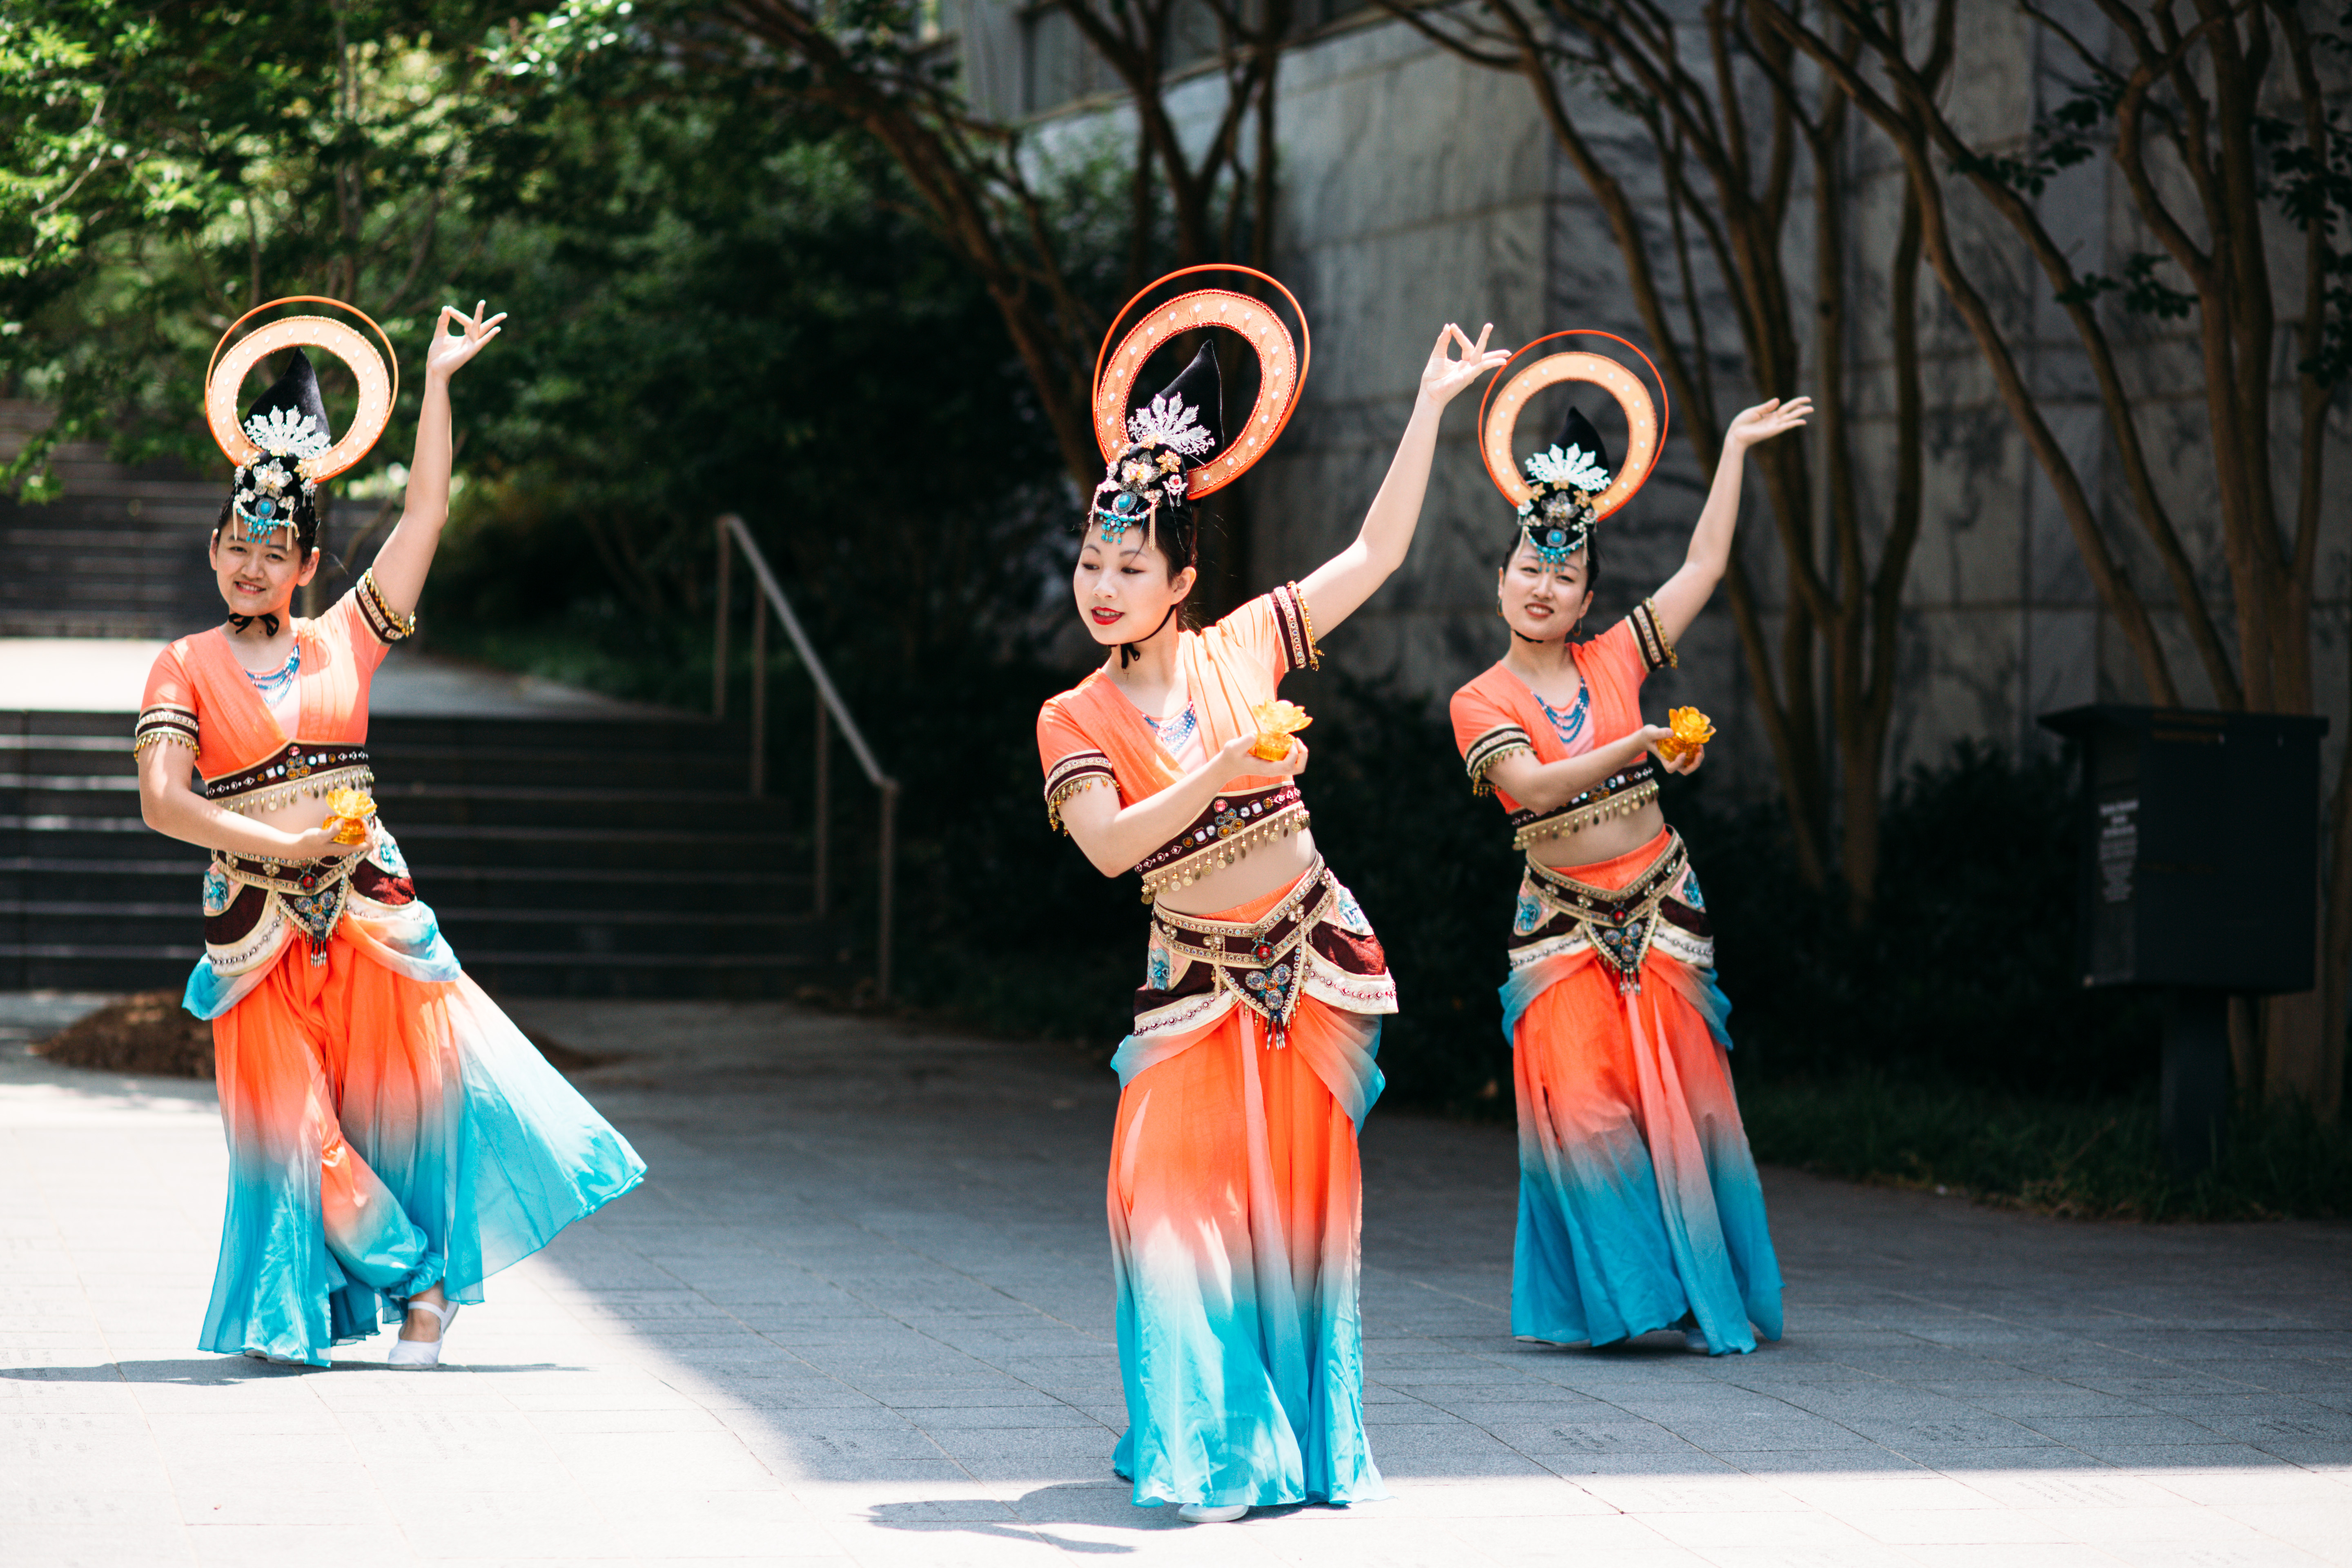 Traditional Chinese dancers wearing colorful blue and orange outfits